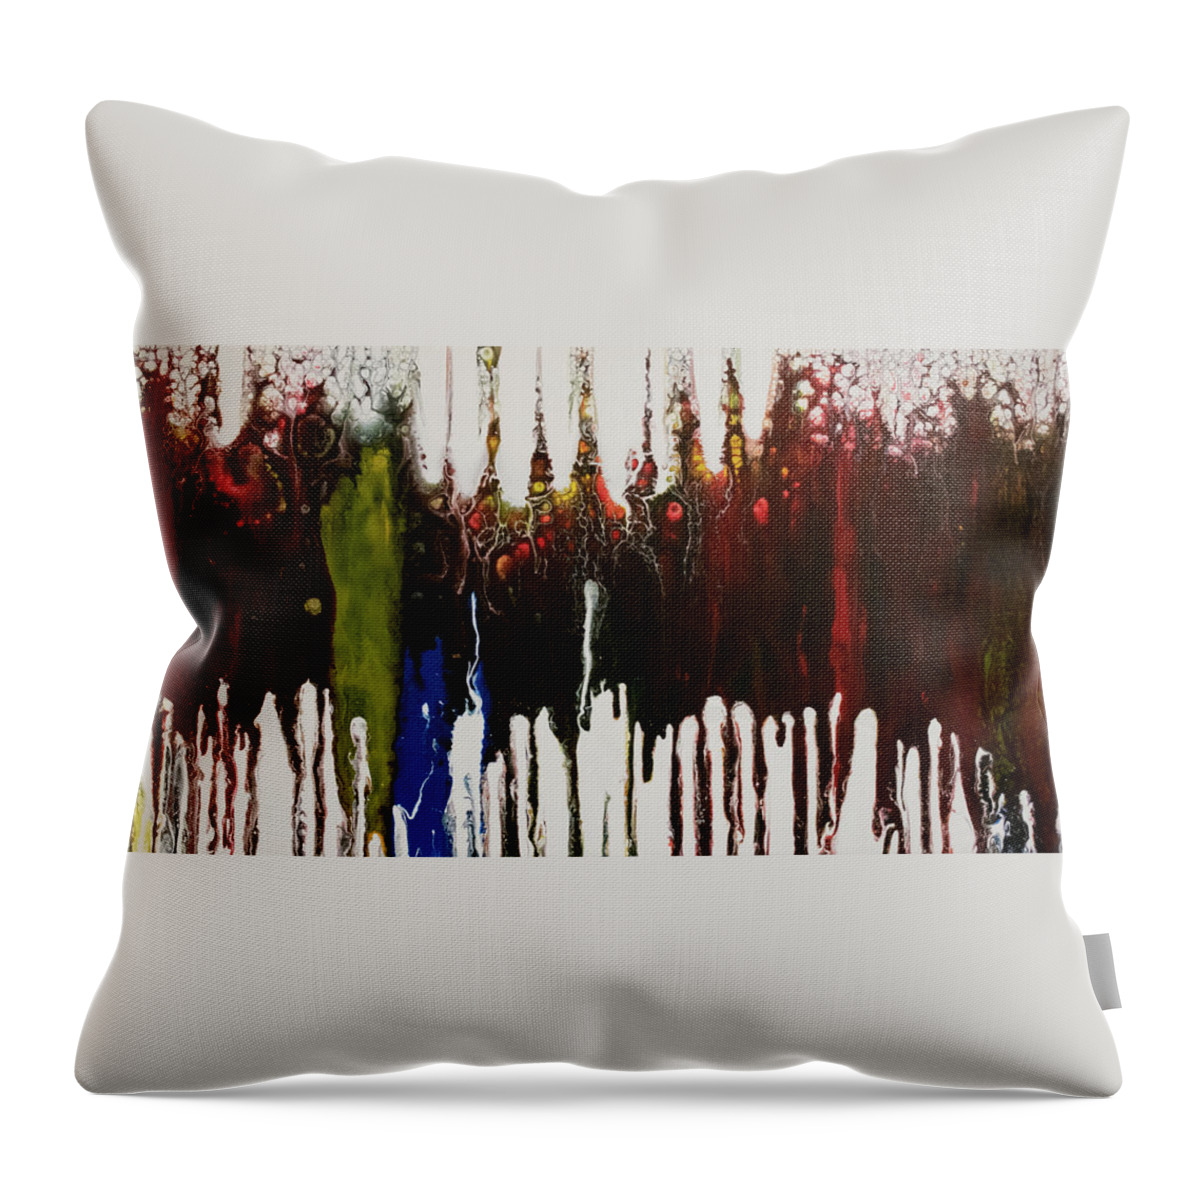 Pour Throw Pillow featuring the mixed media Spirited by Aimee Bruno